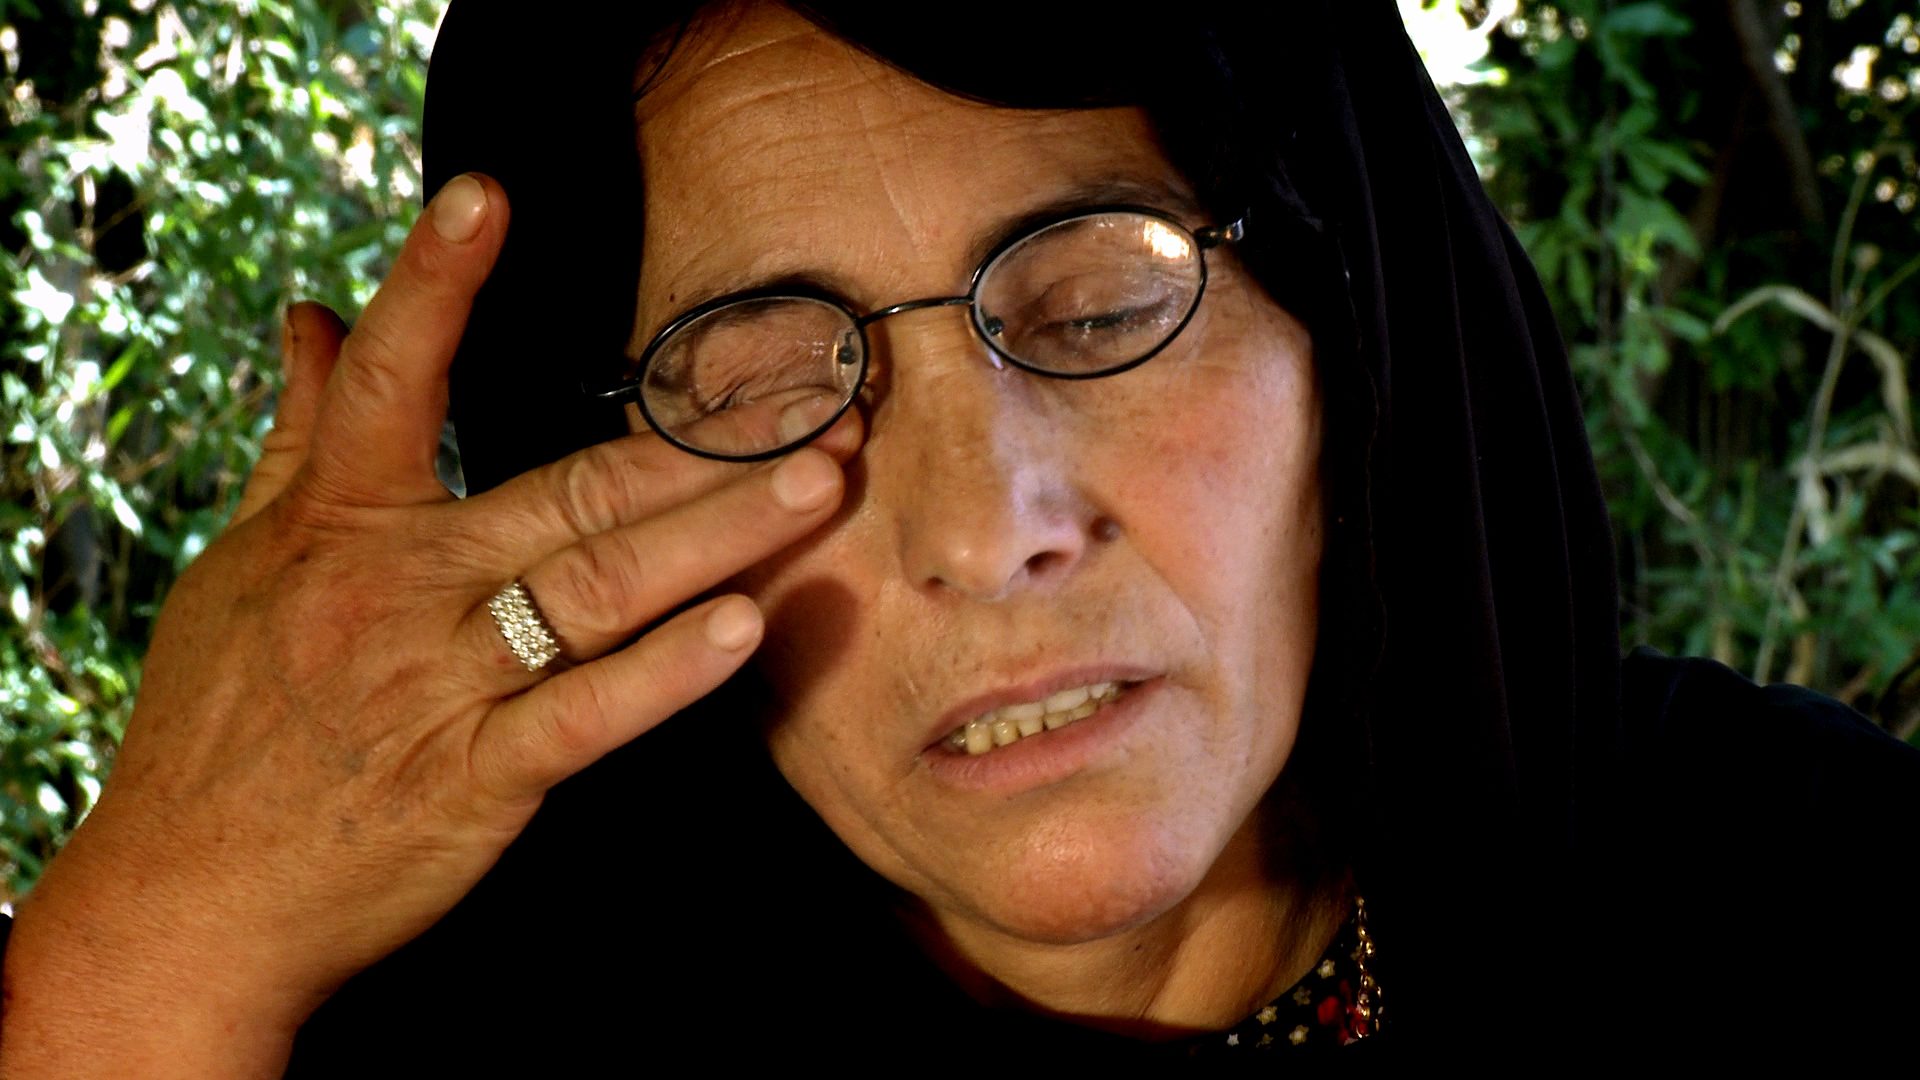 Although vomiting and unable to see, NAJIBA KHADIIR AHMED, escaped into the mountains on a donkey and sheltered in a cave. With her son hungry and in pain beside her, they stayed there until nightfall. Villagers then found them both and brought them to a hospital in Raniya. The next day, they were both imprisoned in Erbil.